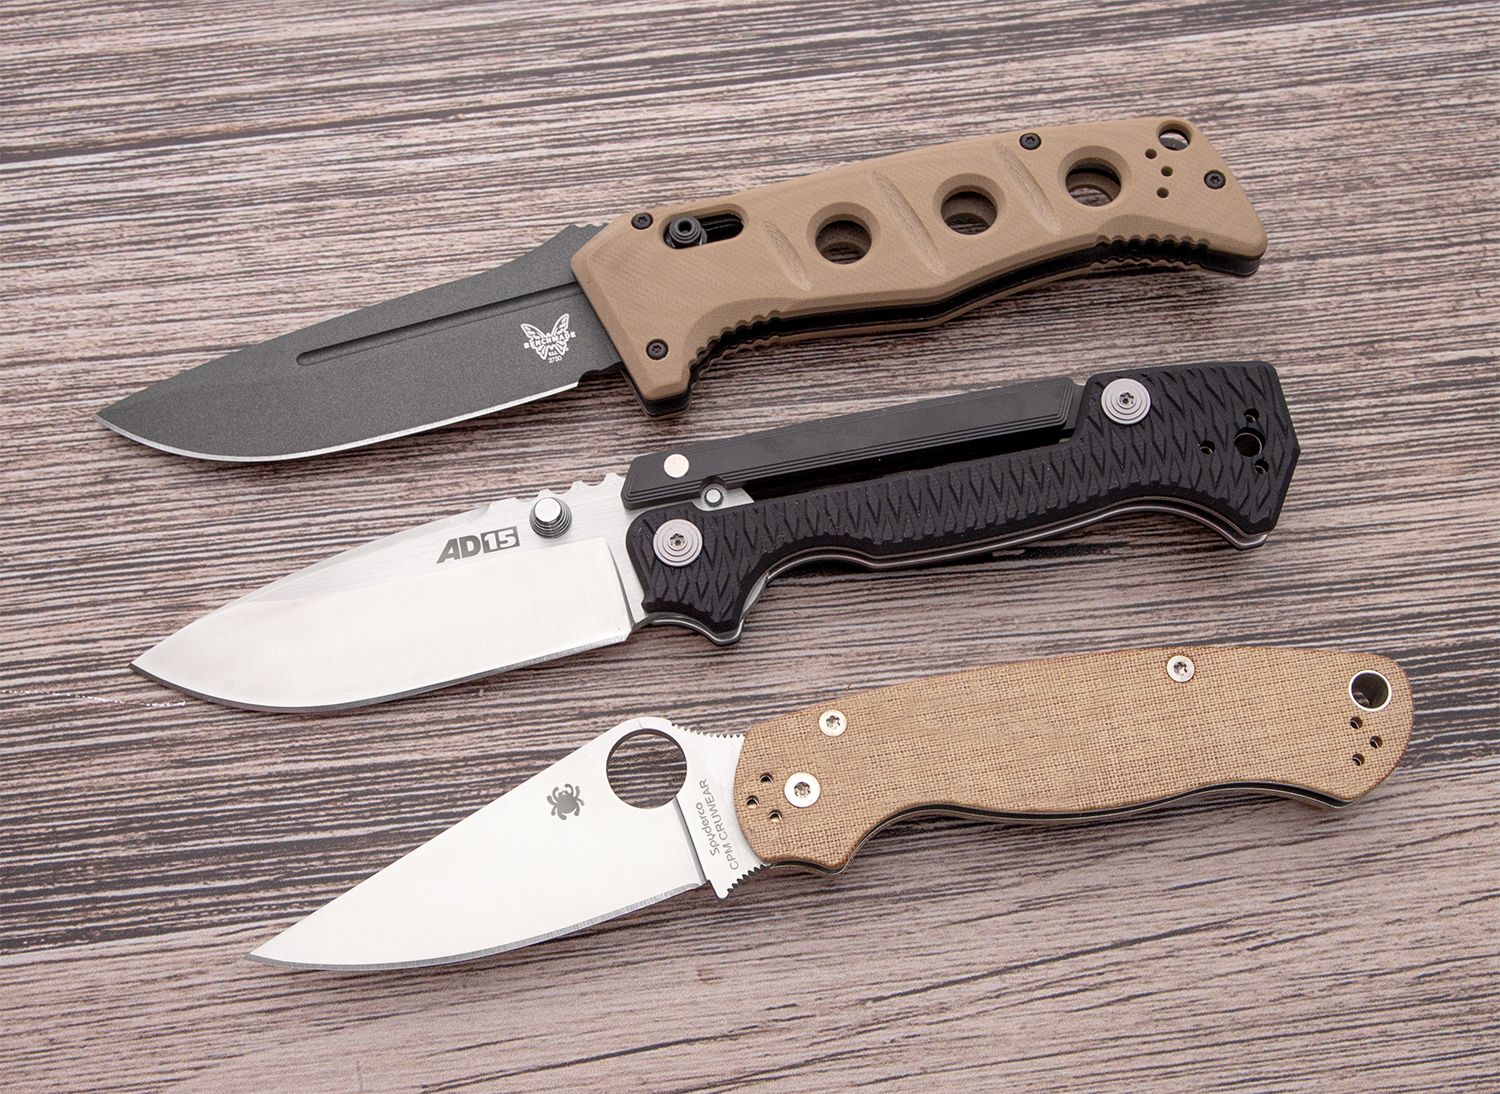 AD-15 (S35VN)  Cold Steel Knives